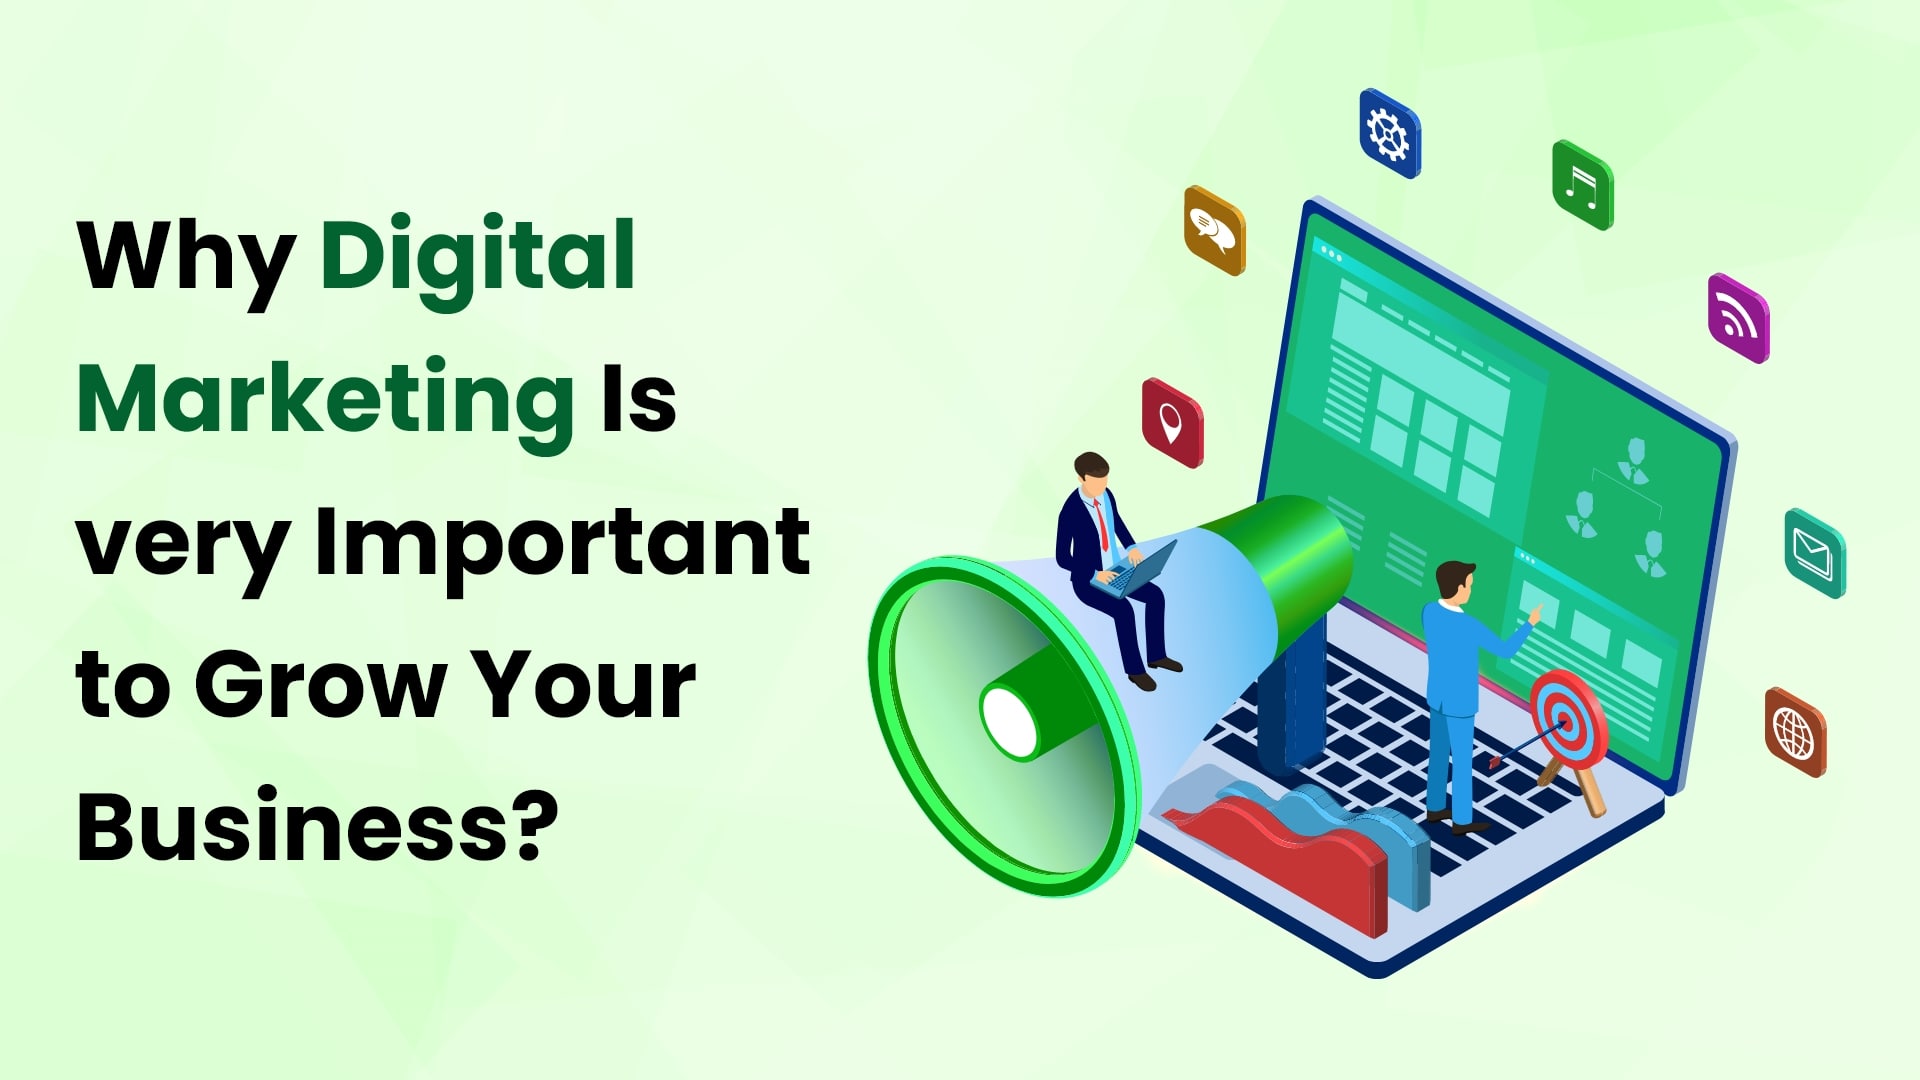 Why Digital Marketing Is very Important to Grow Your Business